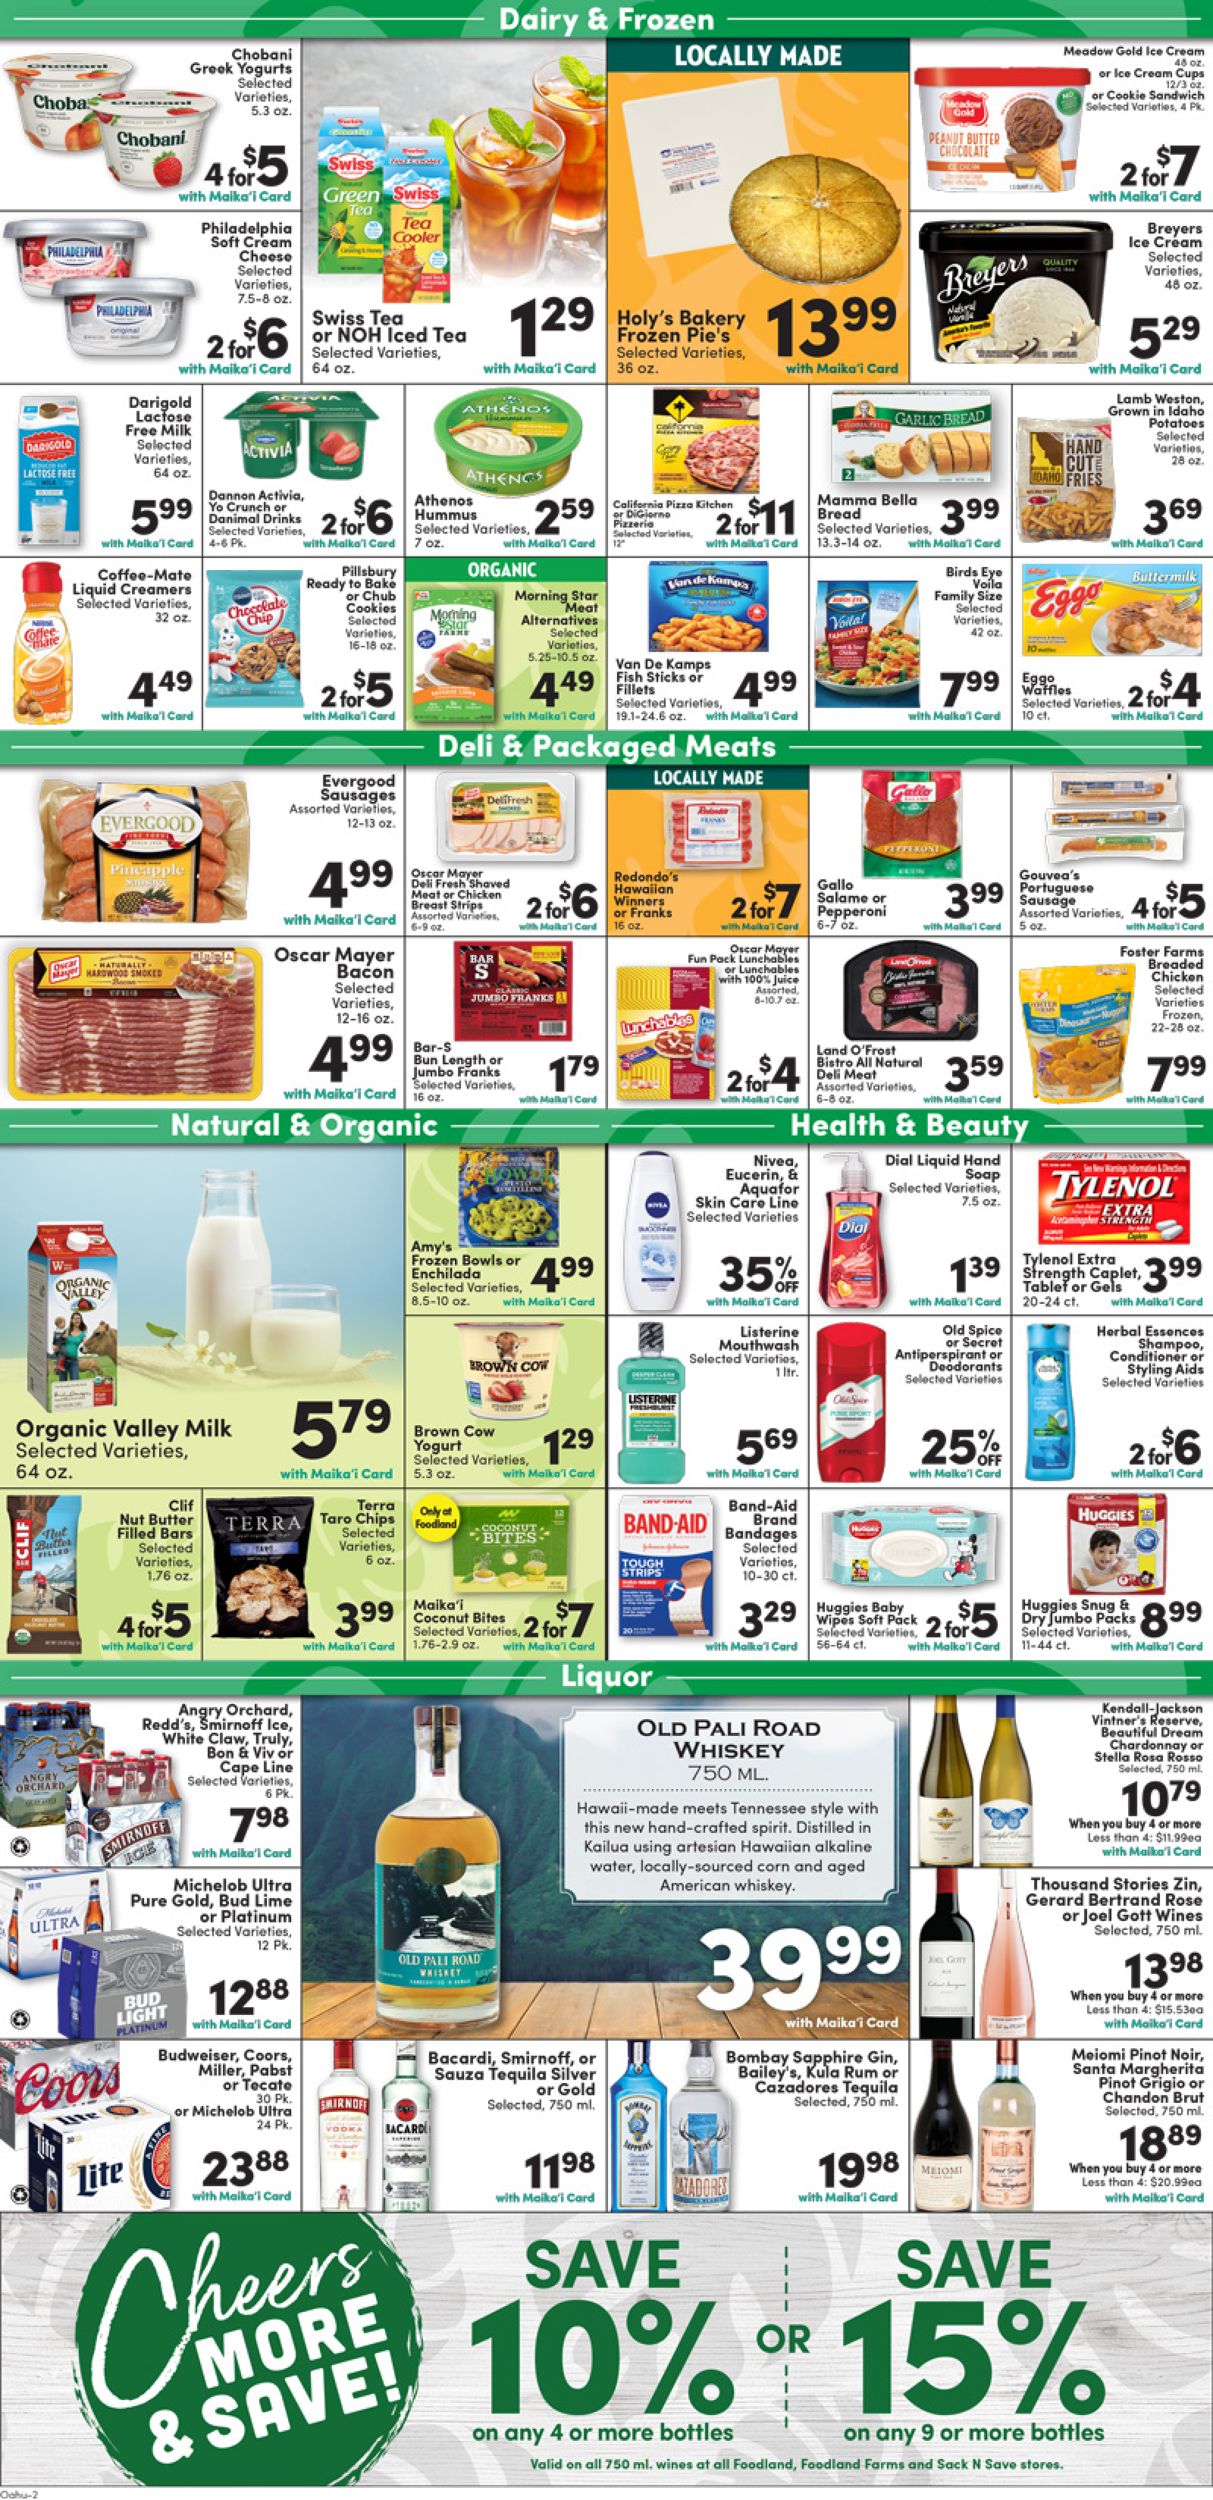 Foodland Current weekly ad 06/05 - 06/11/2019 [2] - frequent-ads.com